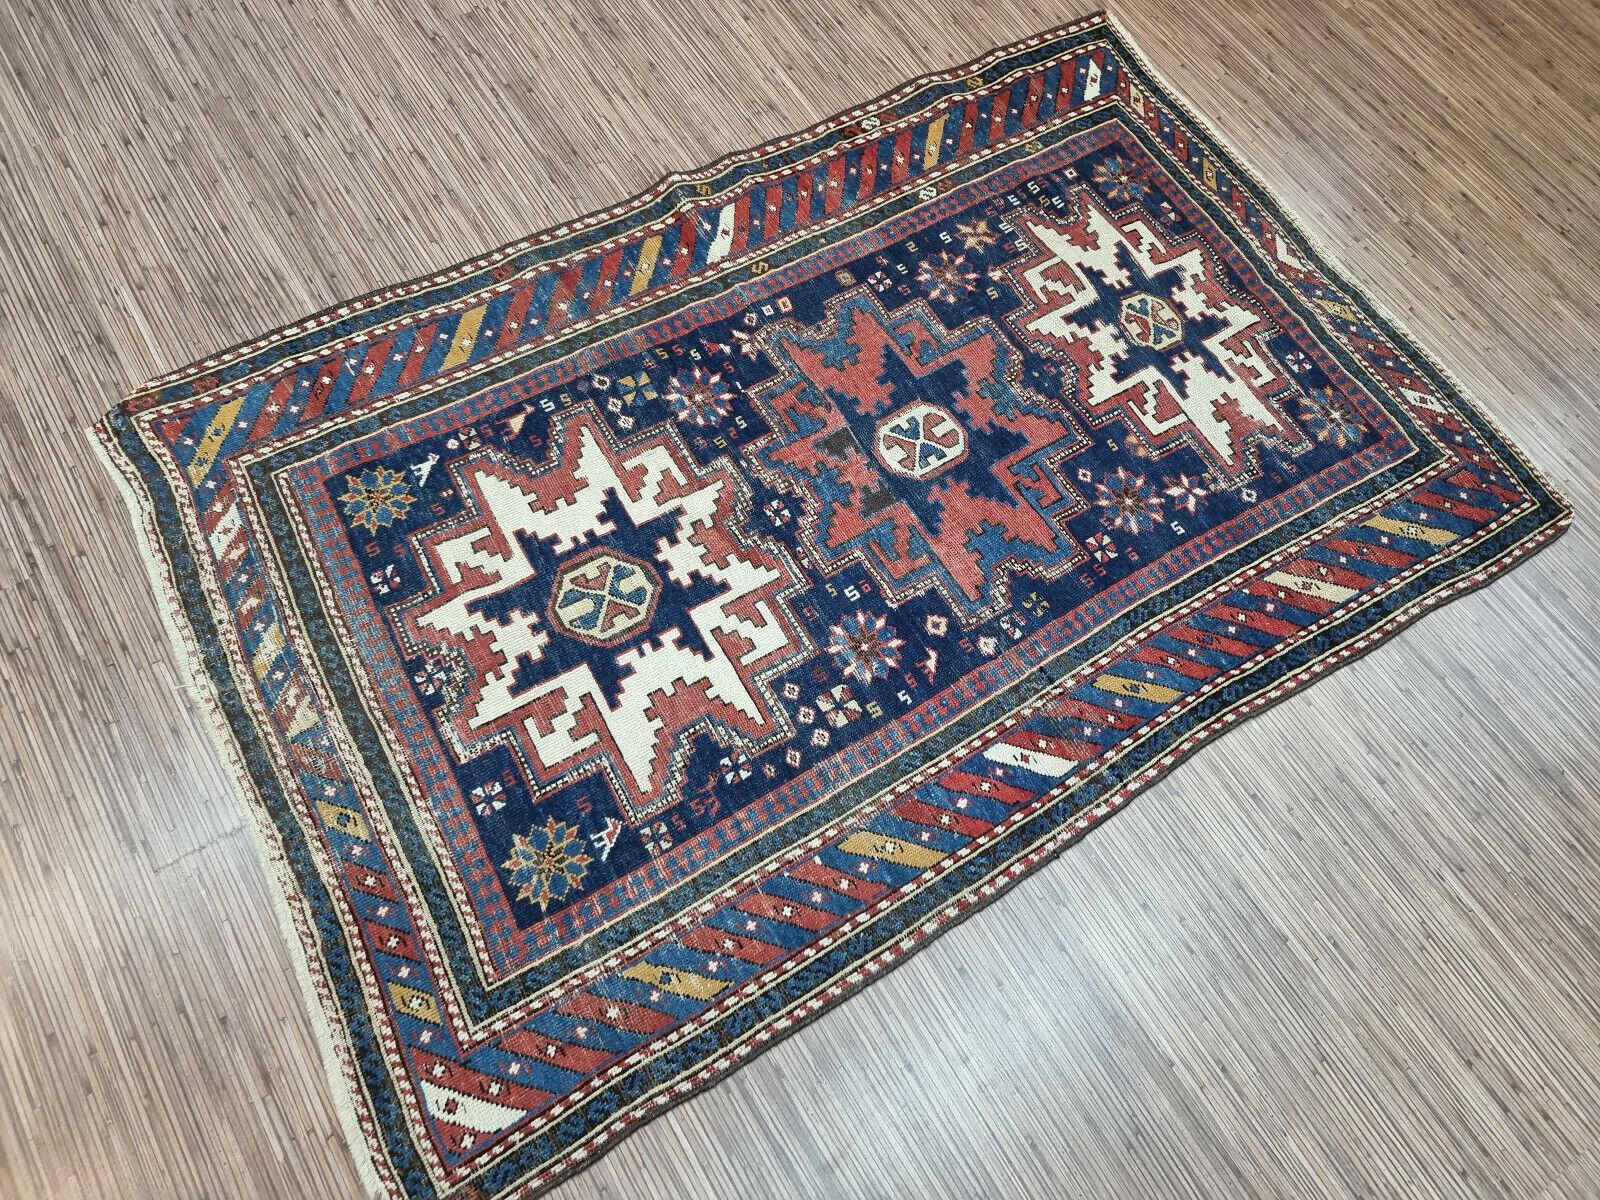 Early 20th Century Handmade Antique Caucasian Shirvan Rug 3.4' x 5.2', 1900s - 1D89 For Sale